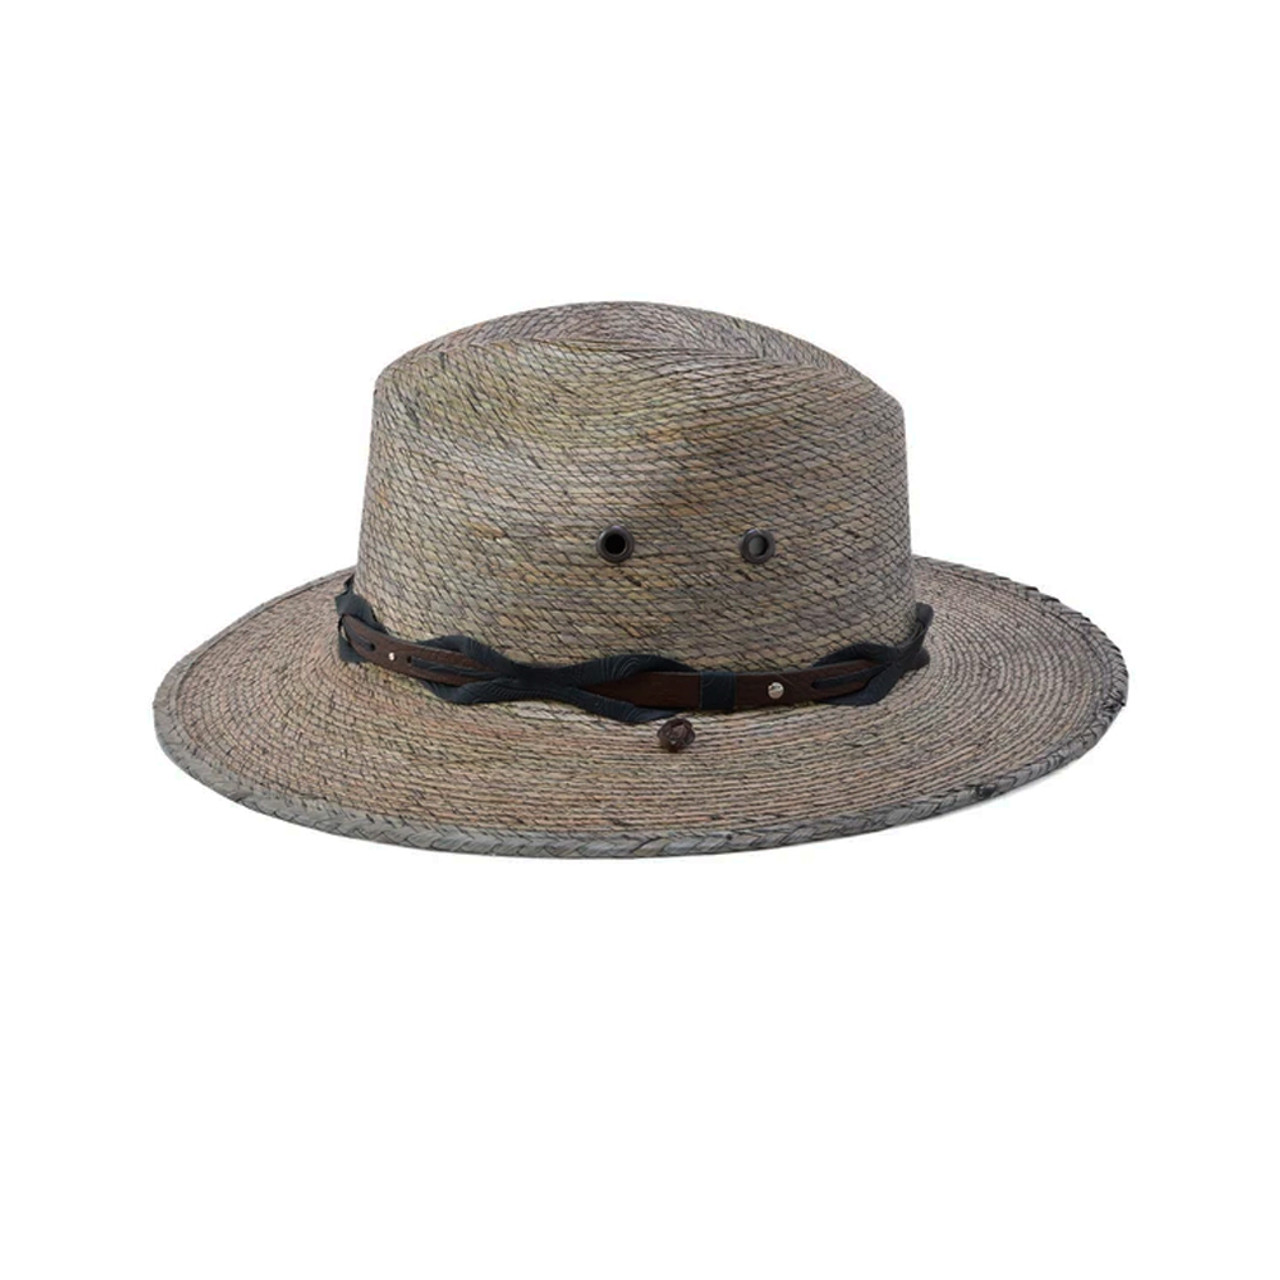 Marco - Stetson Collection Natural/ Burned / Medium